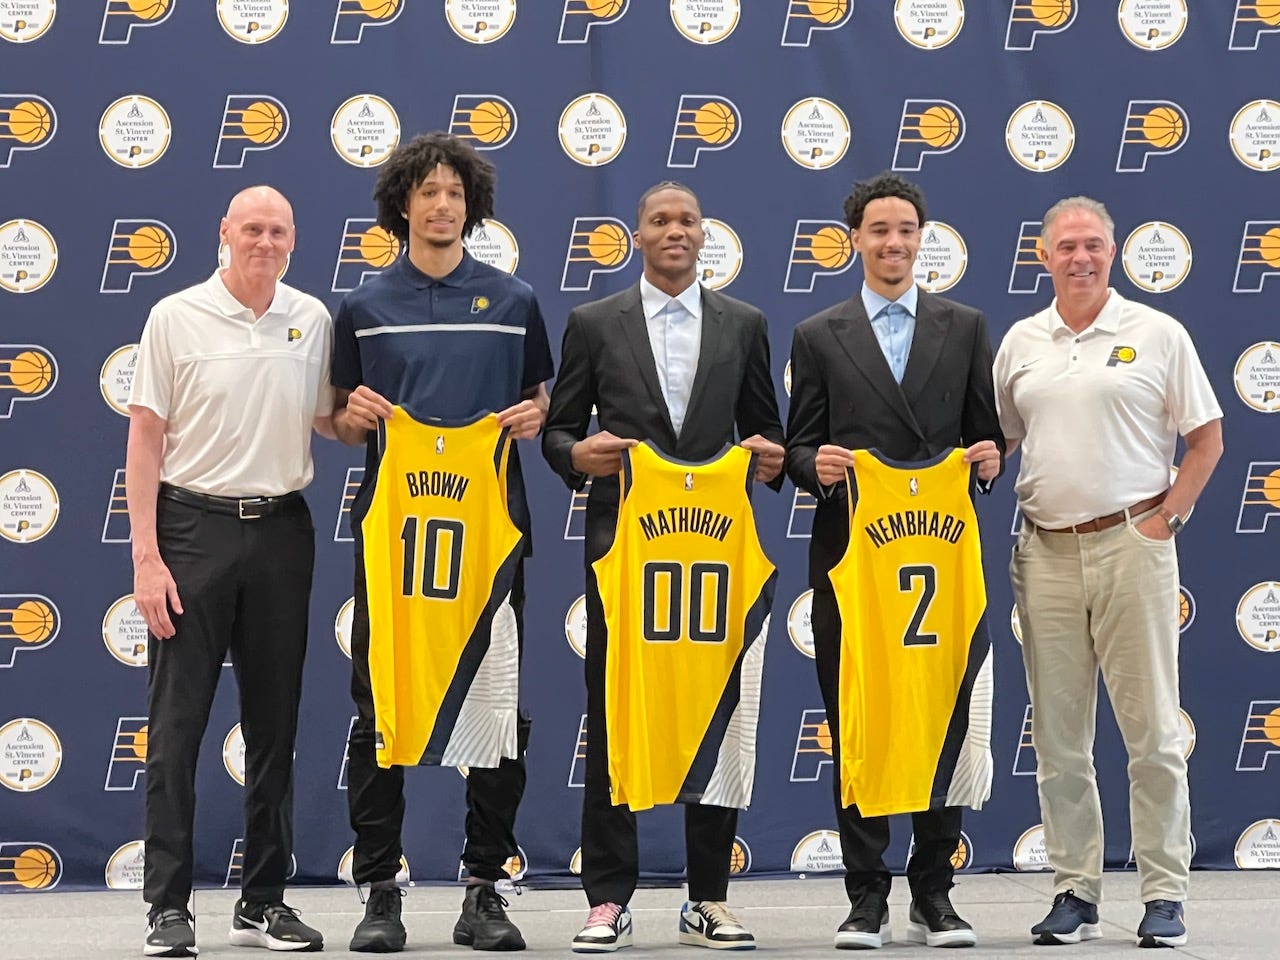 The Pacers’ 2022 draft class was introduced to fans for the first time in June.